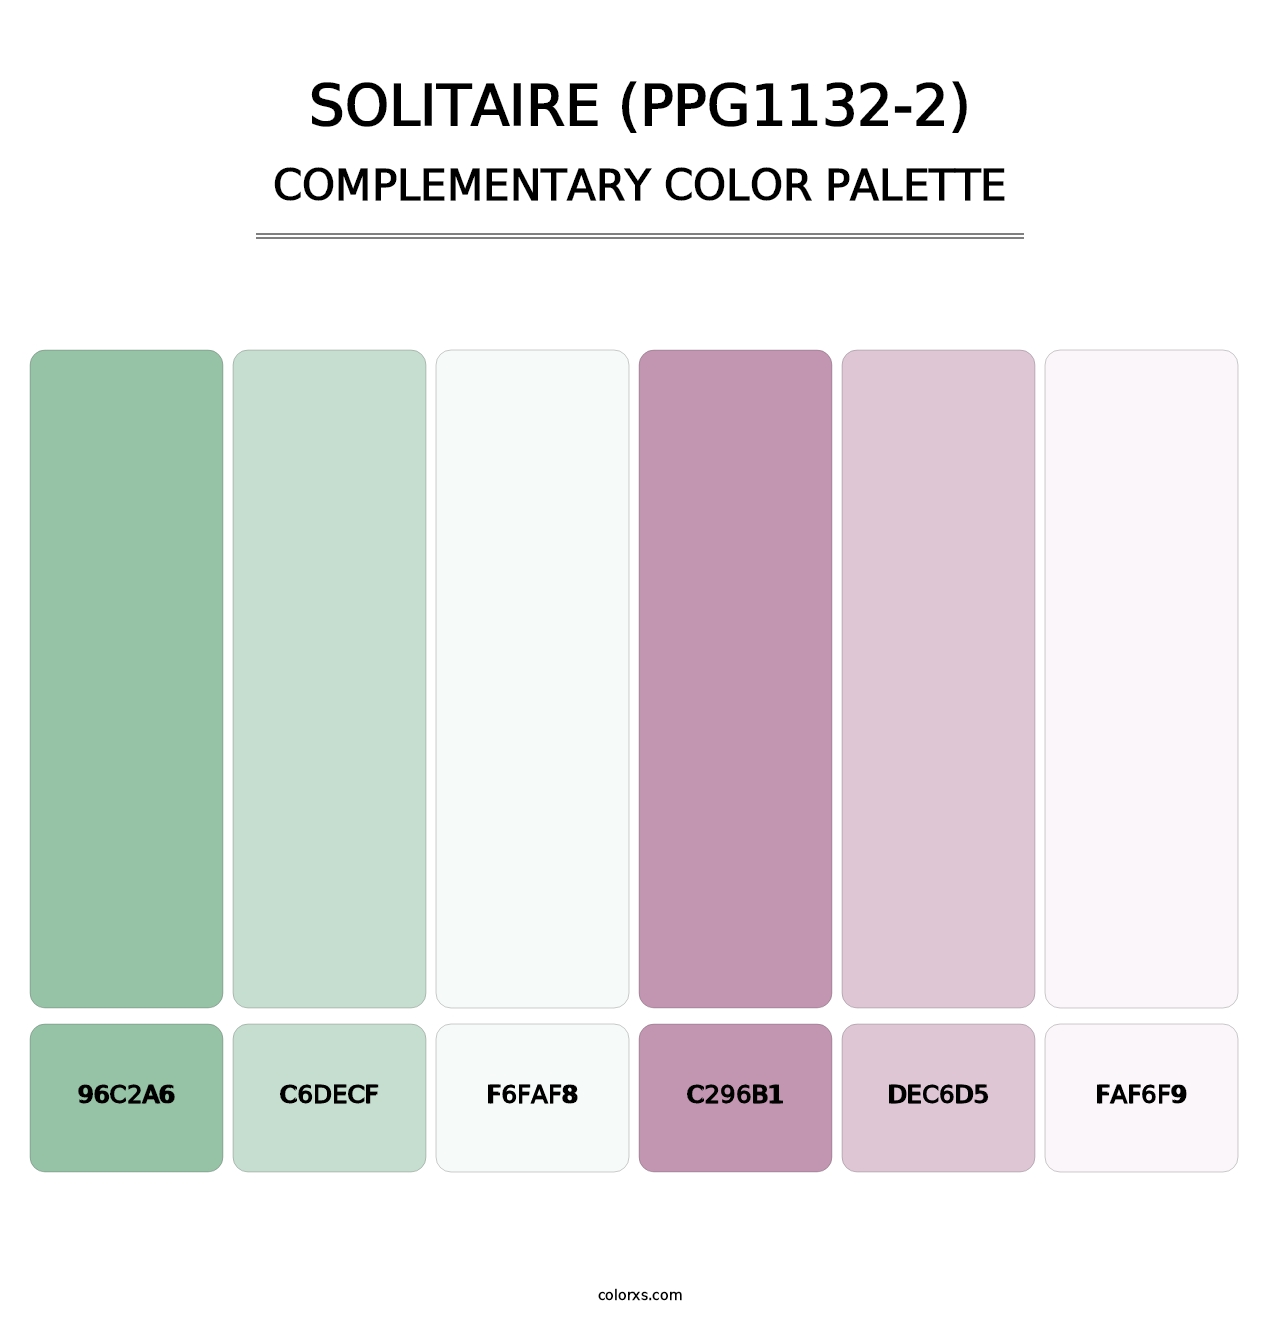 Solitaire (PPG1132-2) - Complementary Color Palette